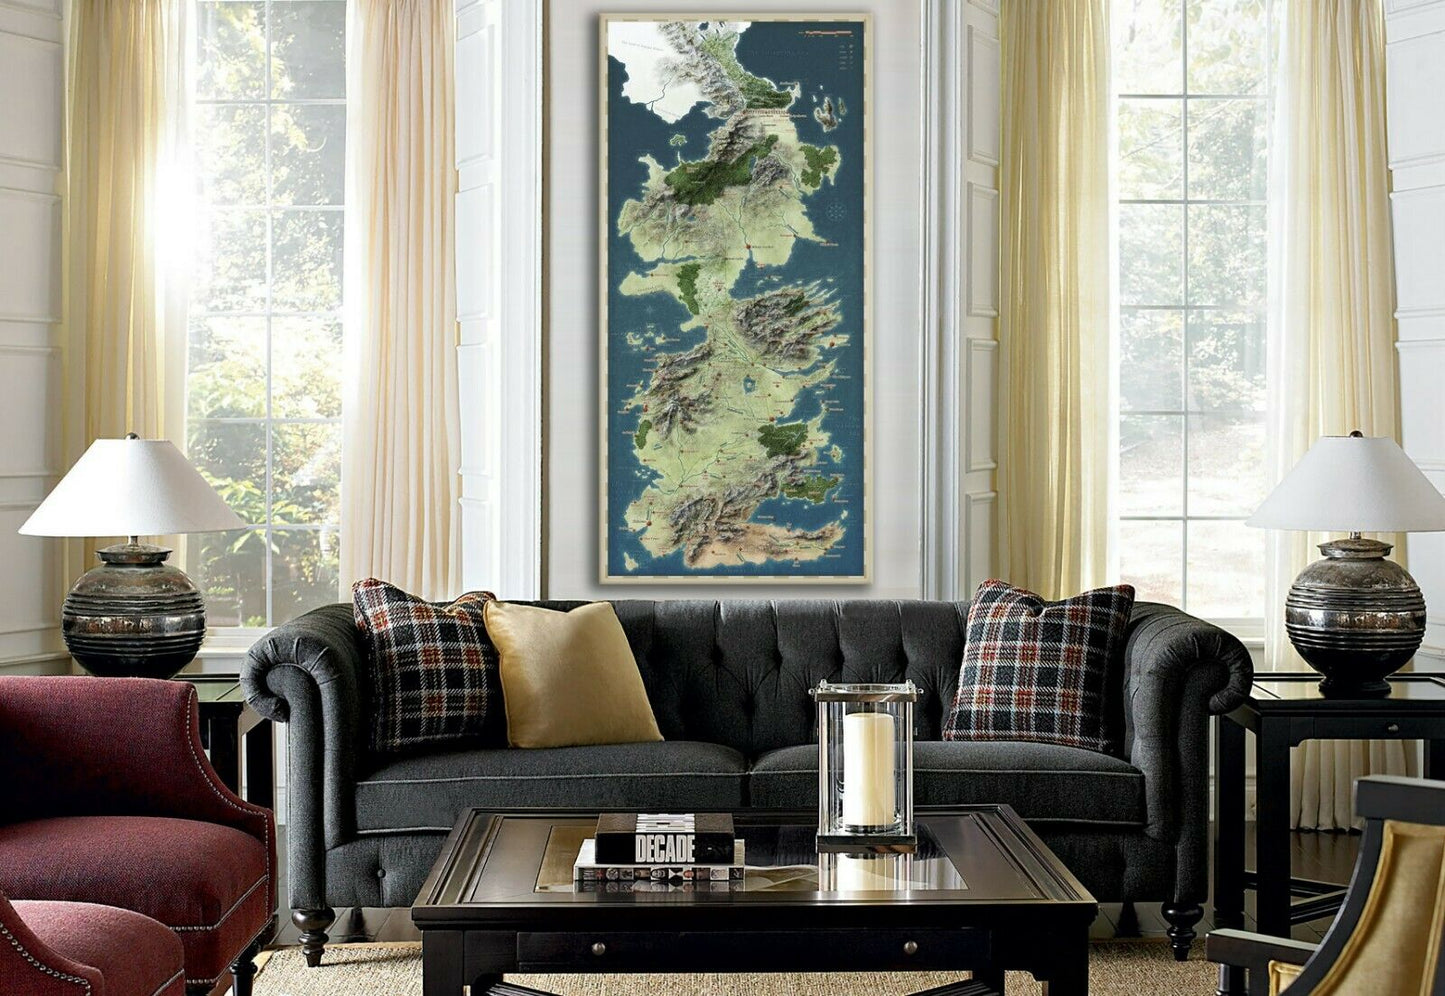 Game of Thrones Westeros Map Framed Canvas Prints Wall Decor Painting Big Size